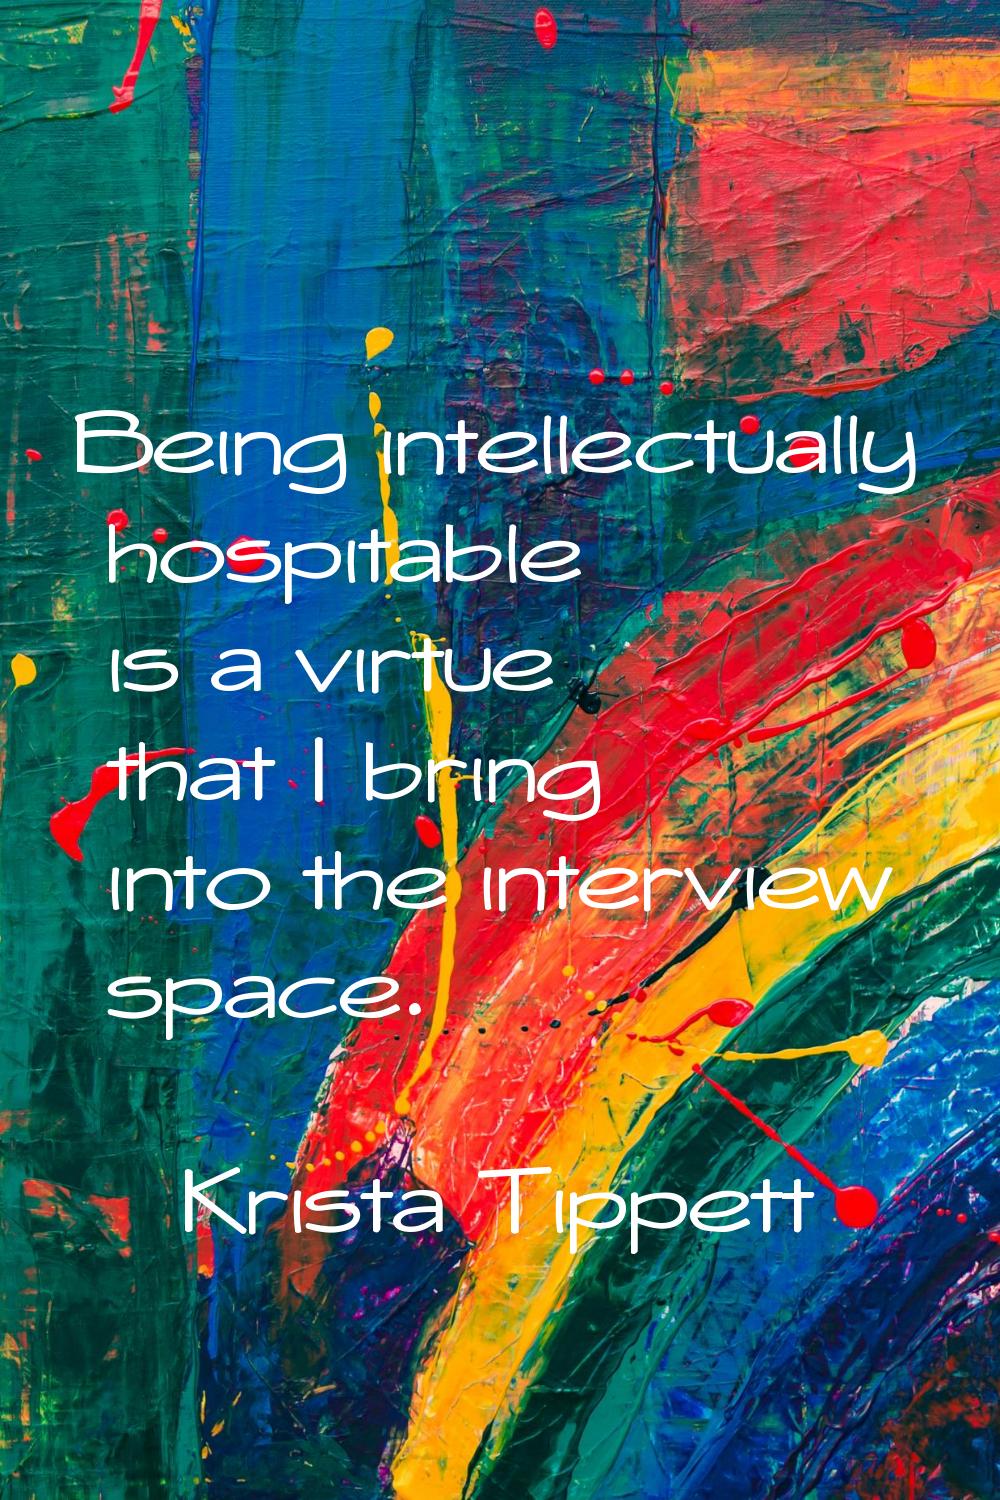 Being intellectually hospitable is a virtue that I bring into the interview space.